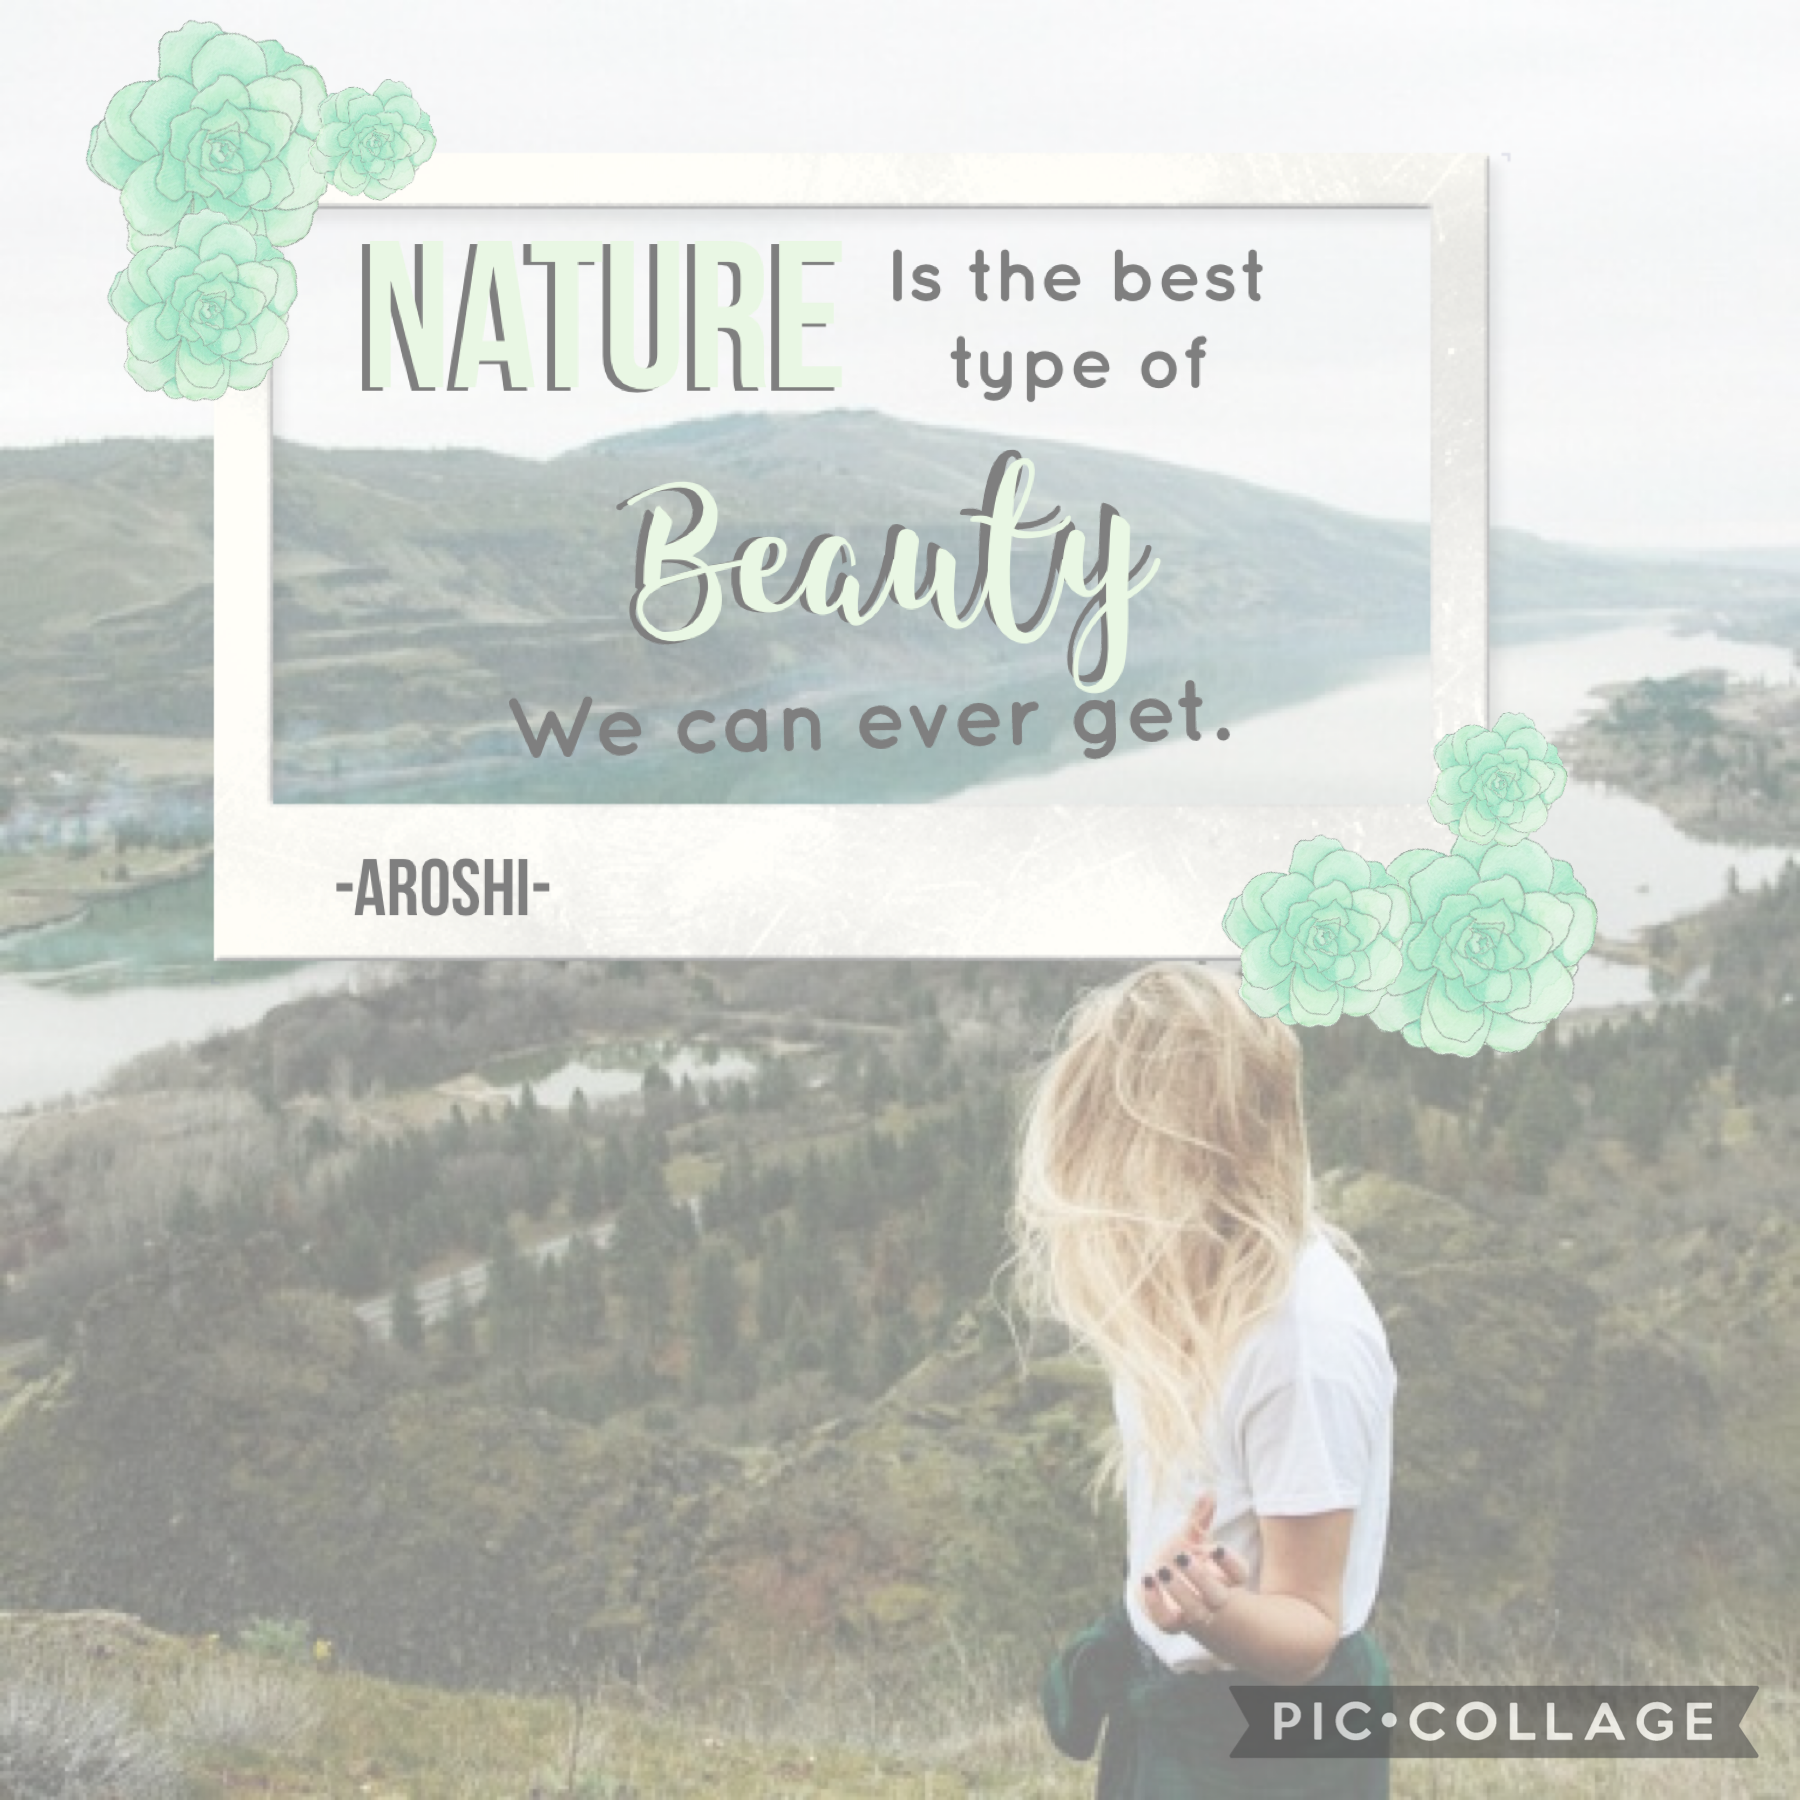 ☘️ 3 March 2021☘️
Collage 4 of the nature series.
Qotd What’s ur fav song
Aotd LoL it keeps changing but right now I like invisible by Anna Clendenjng